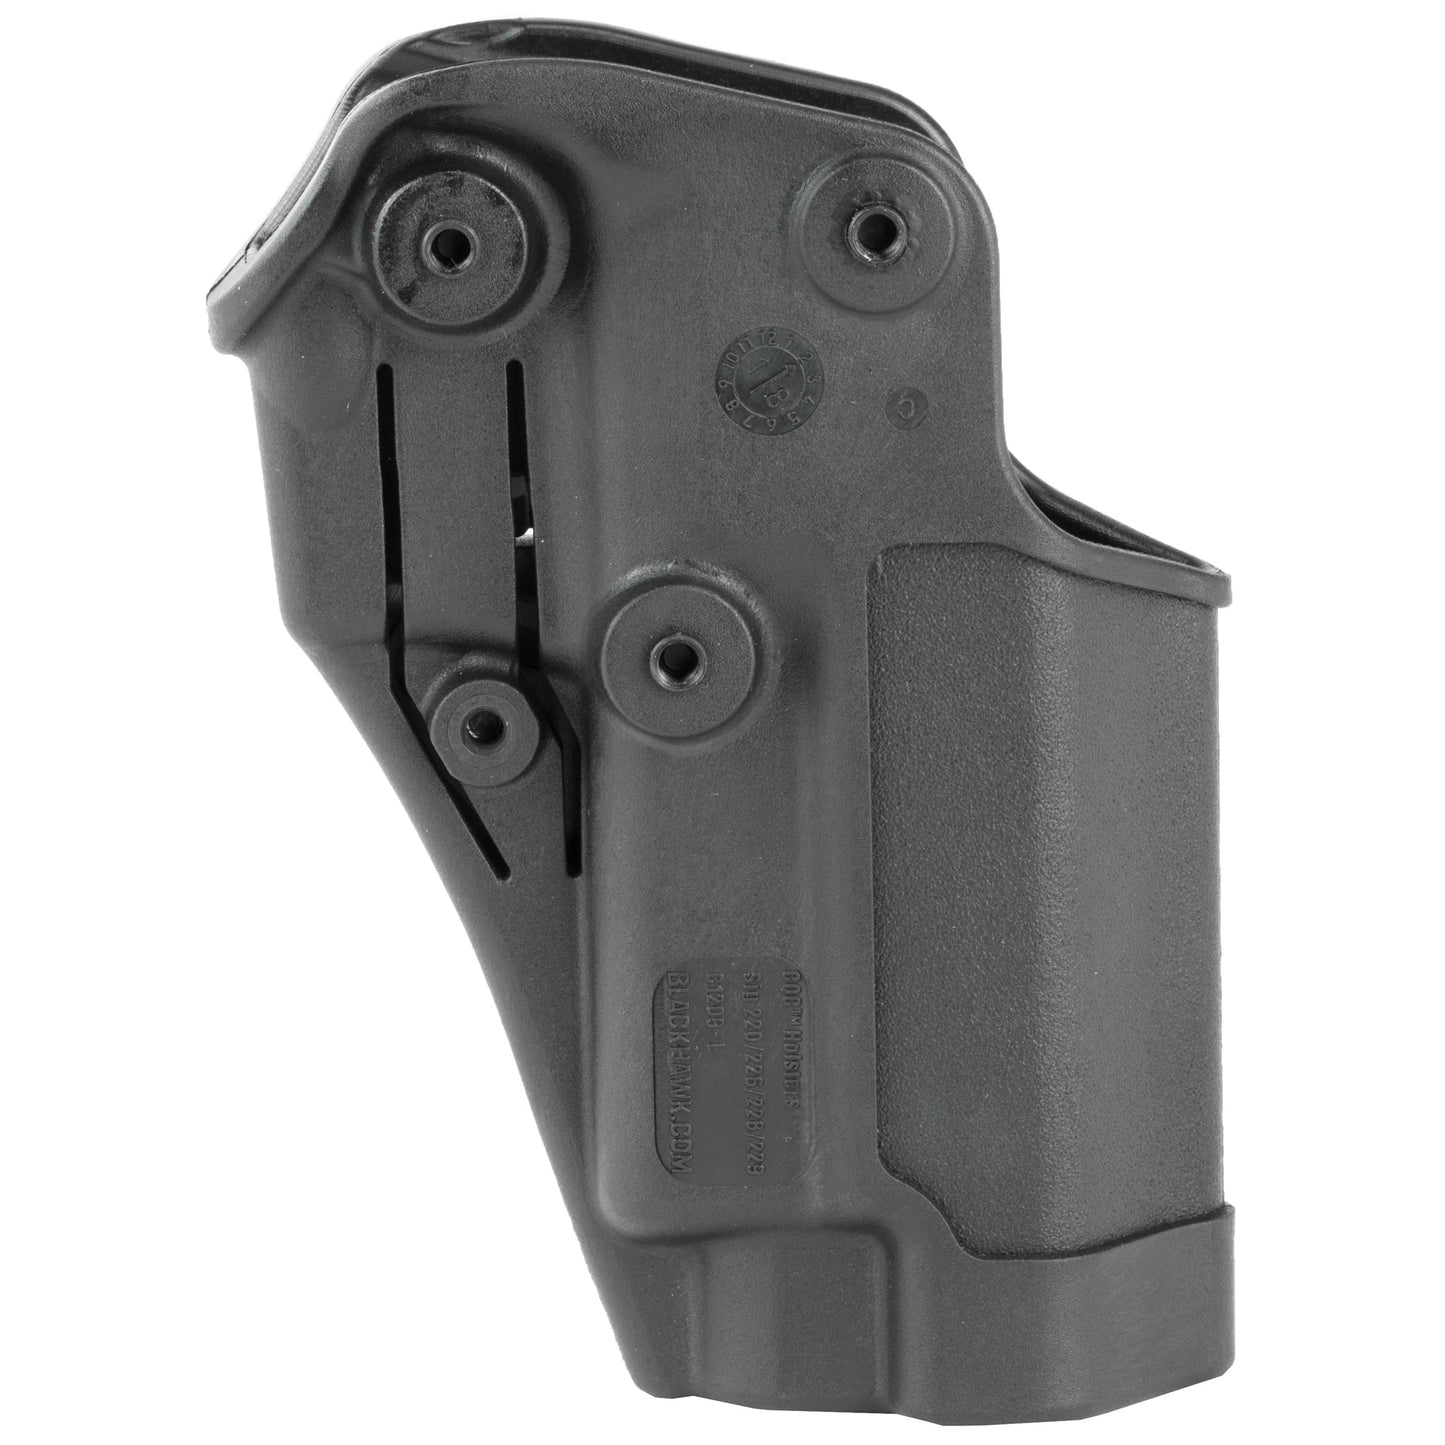 BLACKHAWK, CQC SERPA Holster With Belt and Paddle Attachment, Fits Sig P220/P226/P228/P229, Left Hand, Black